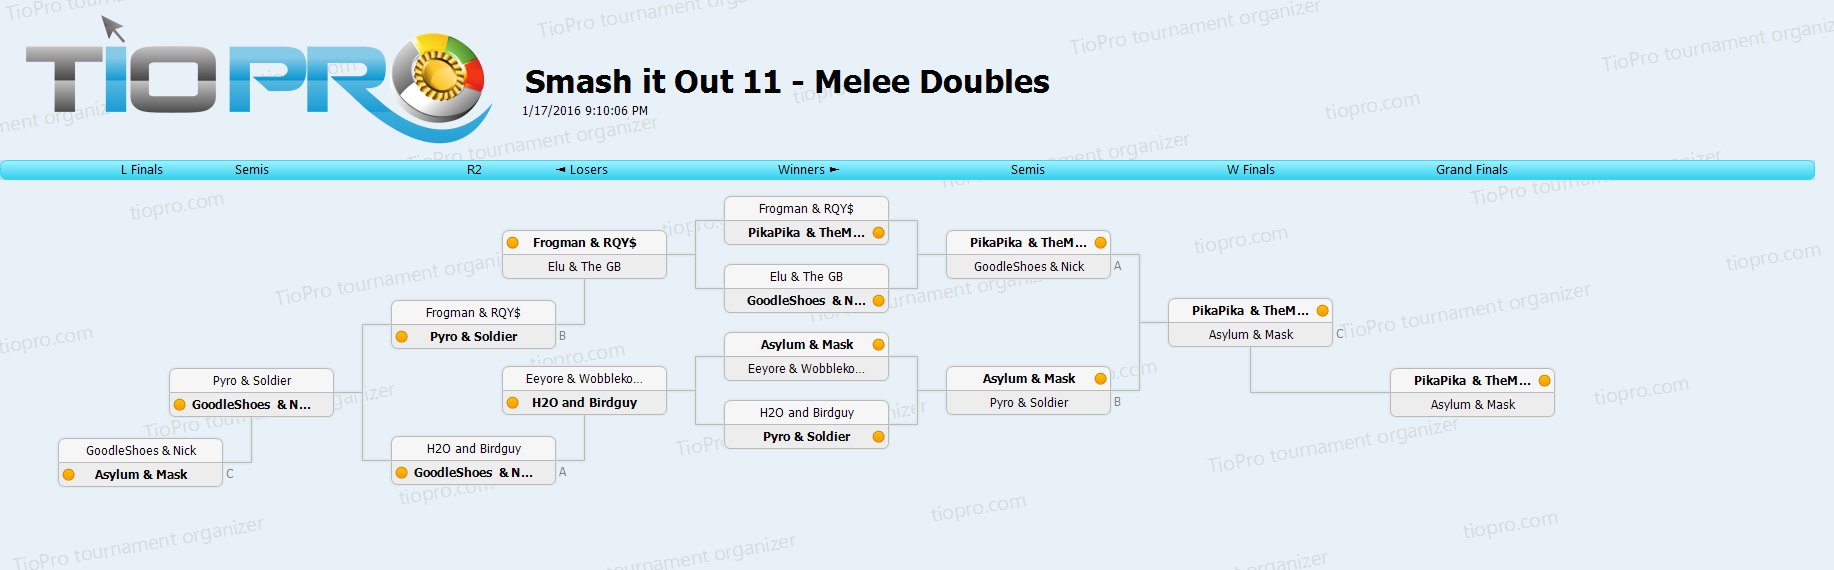 Smash it Out 11 Melee Doubles